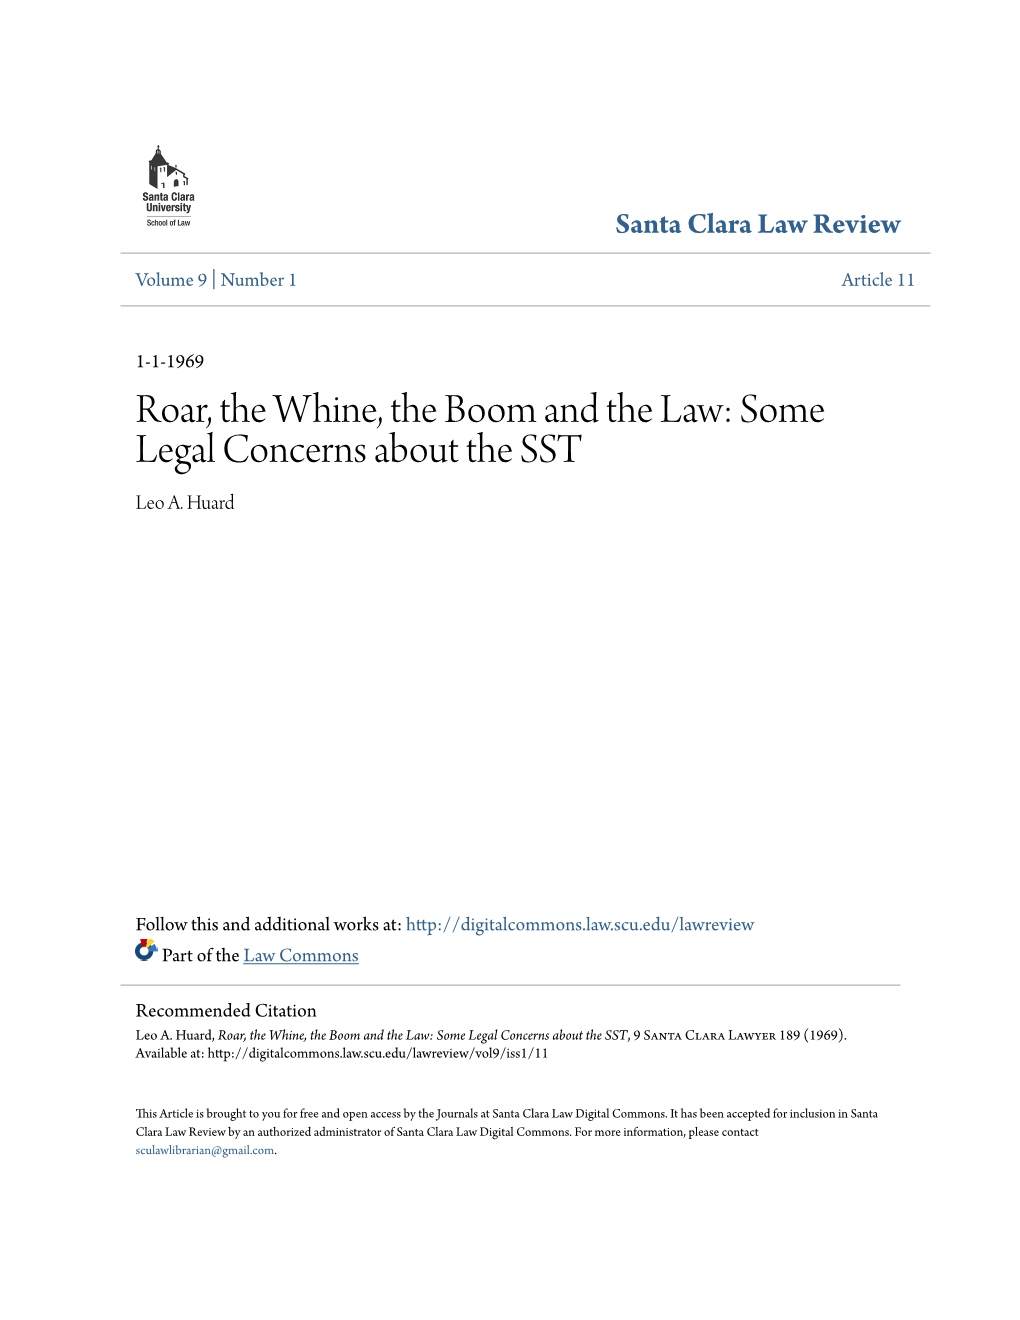 Roar, the Whine, the Boom and the Law: Some Legal Concerns About the SST Leo A